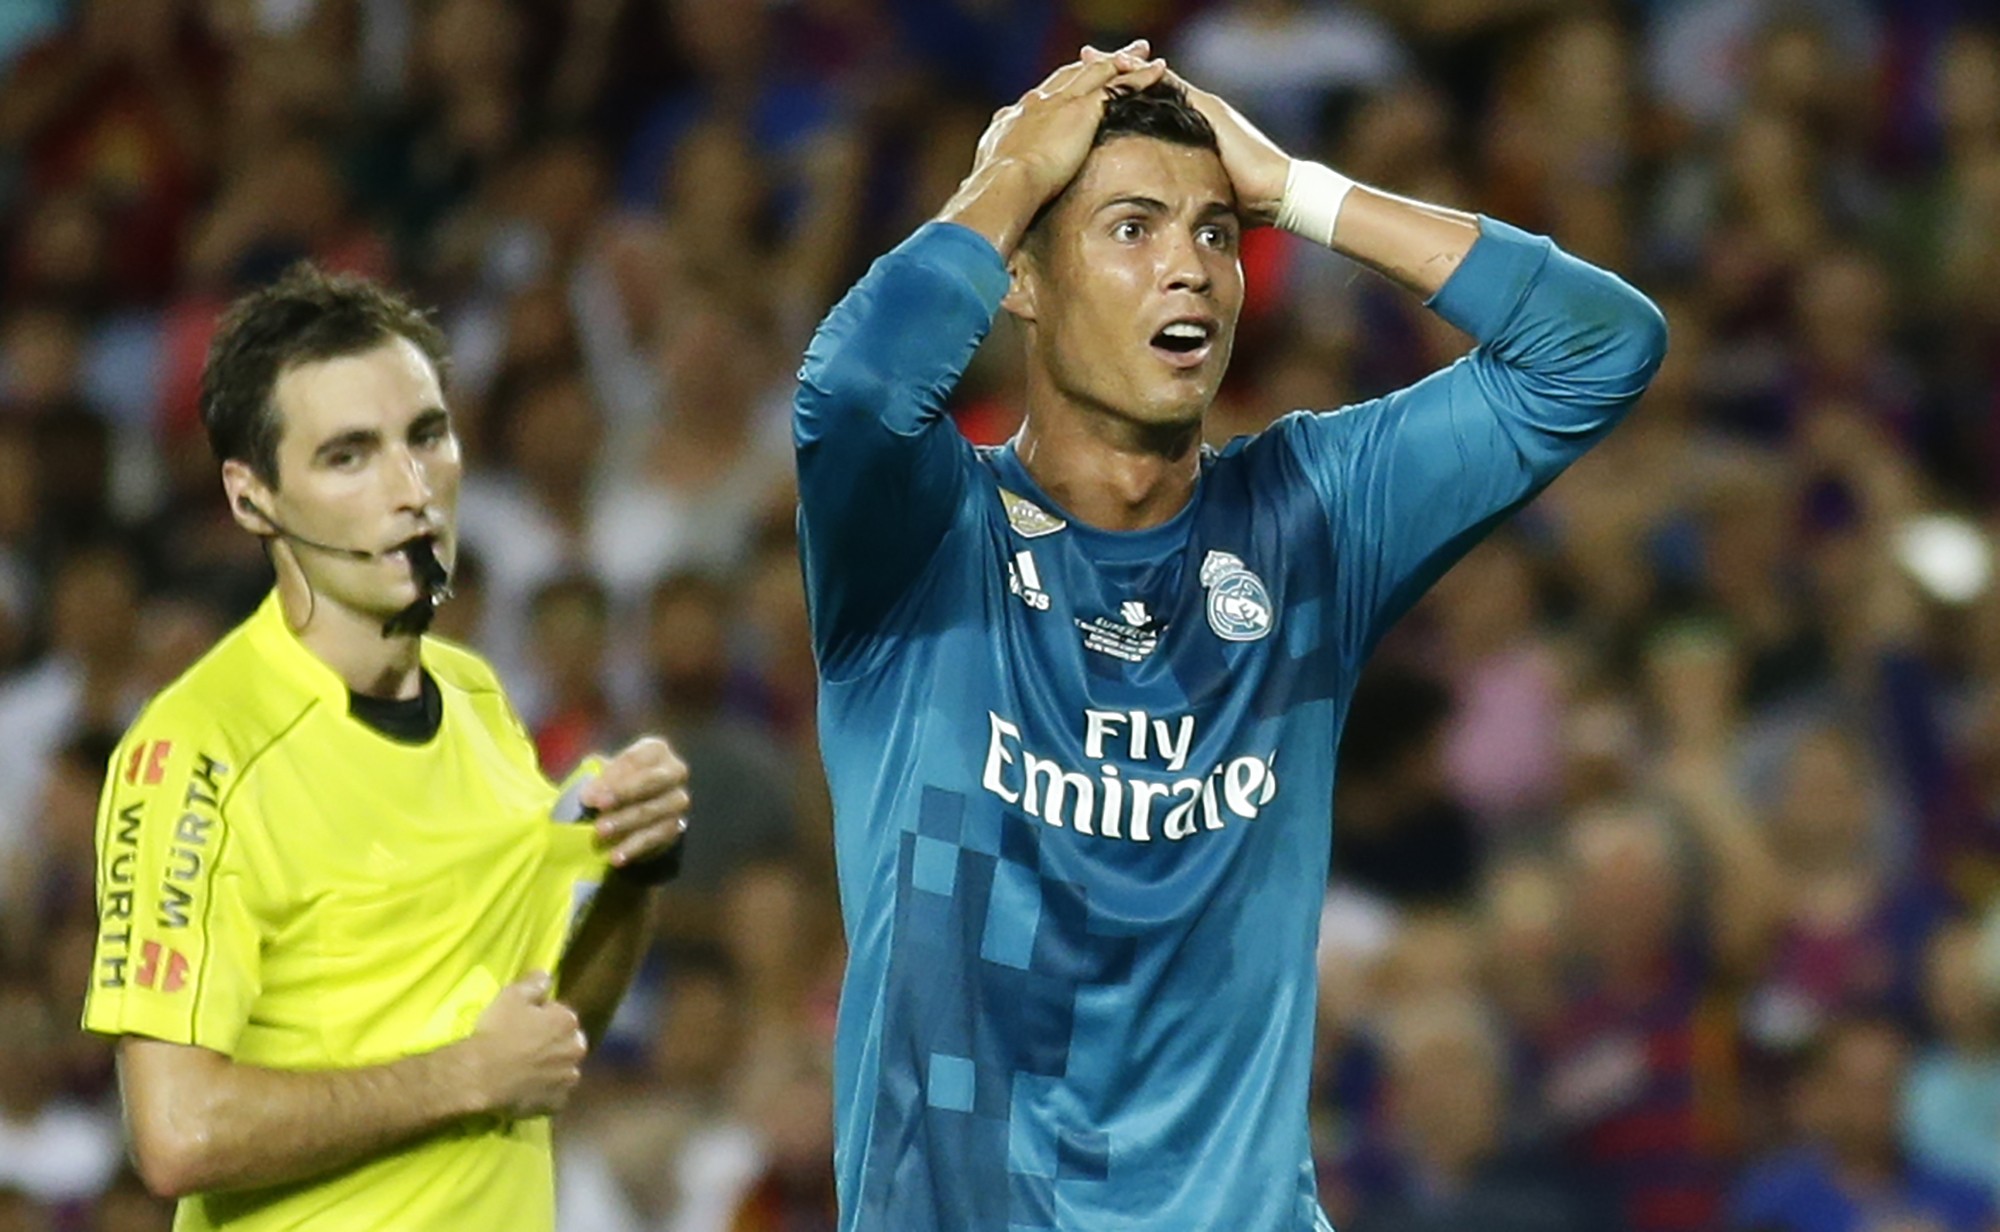 Real Madrid's Cristiano Ronaldo reacts after referee Ricardo de Burgos shows a second yellow card during the Spanish Supercup. Photos: AP